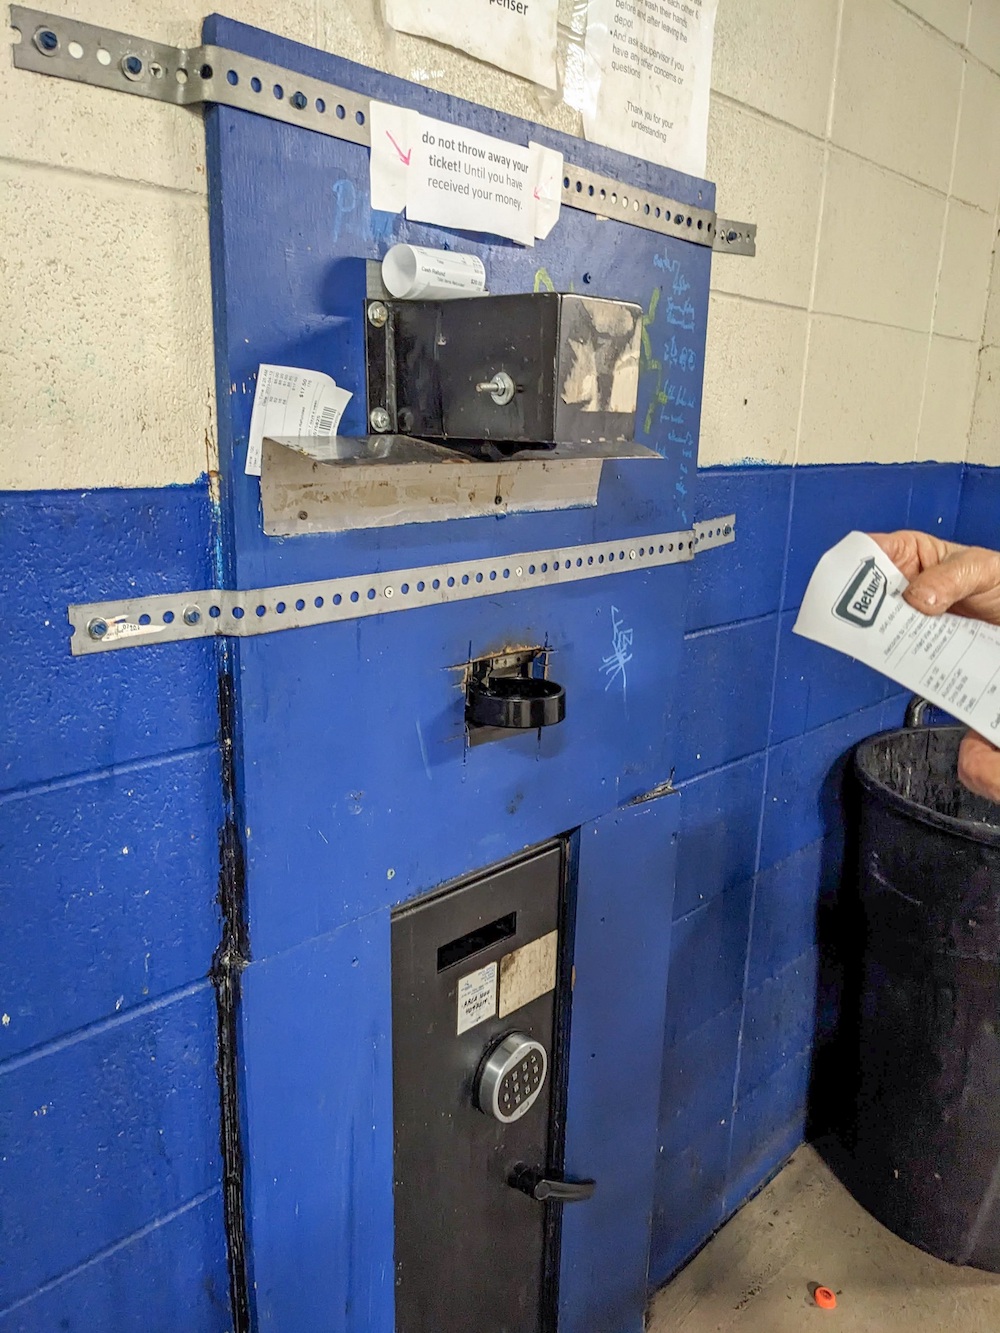 A man holds a receipt on the right side of the image. On the left is a wall with a machine embedded in it. At the base of the machine is a safe.